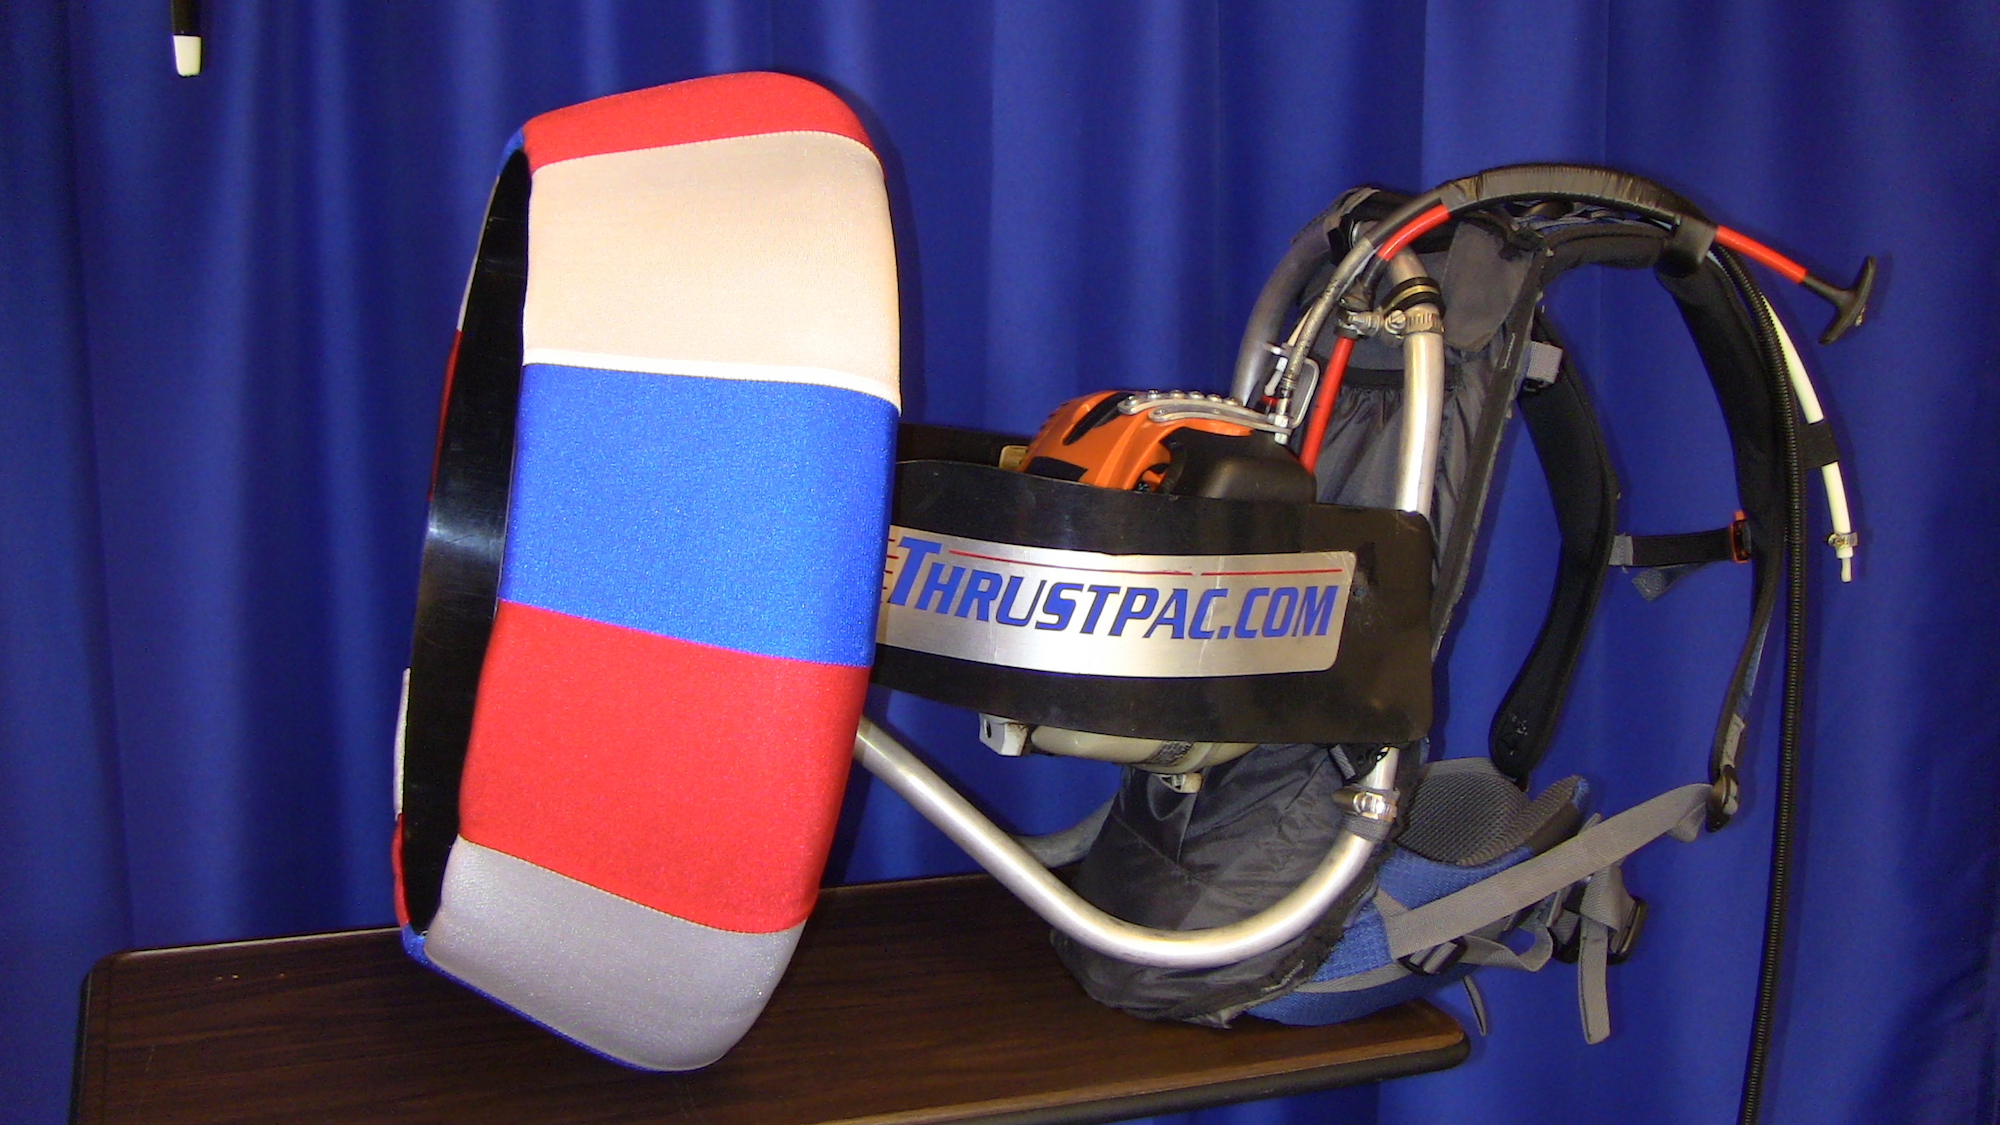 Our red white and blue ThrustPac